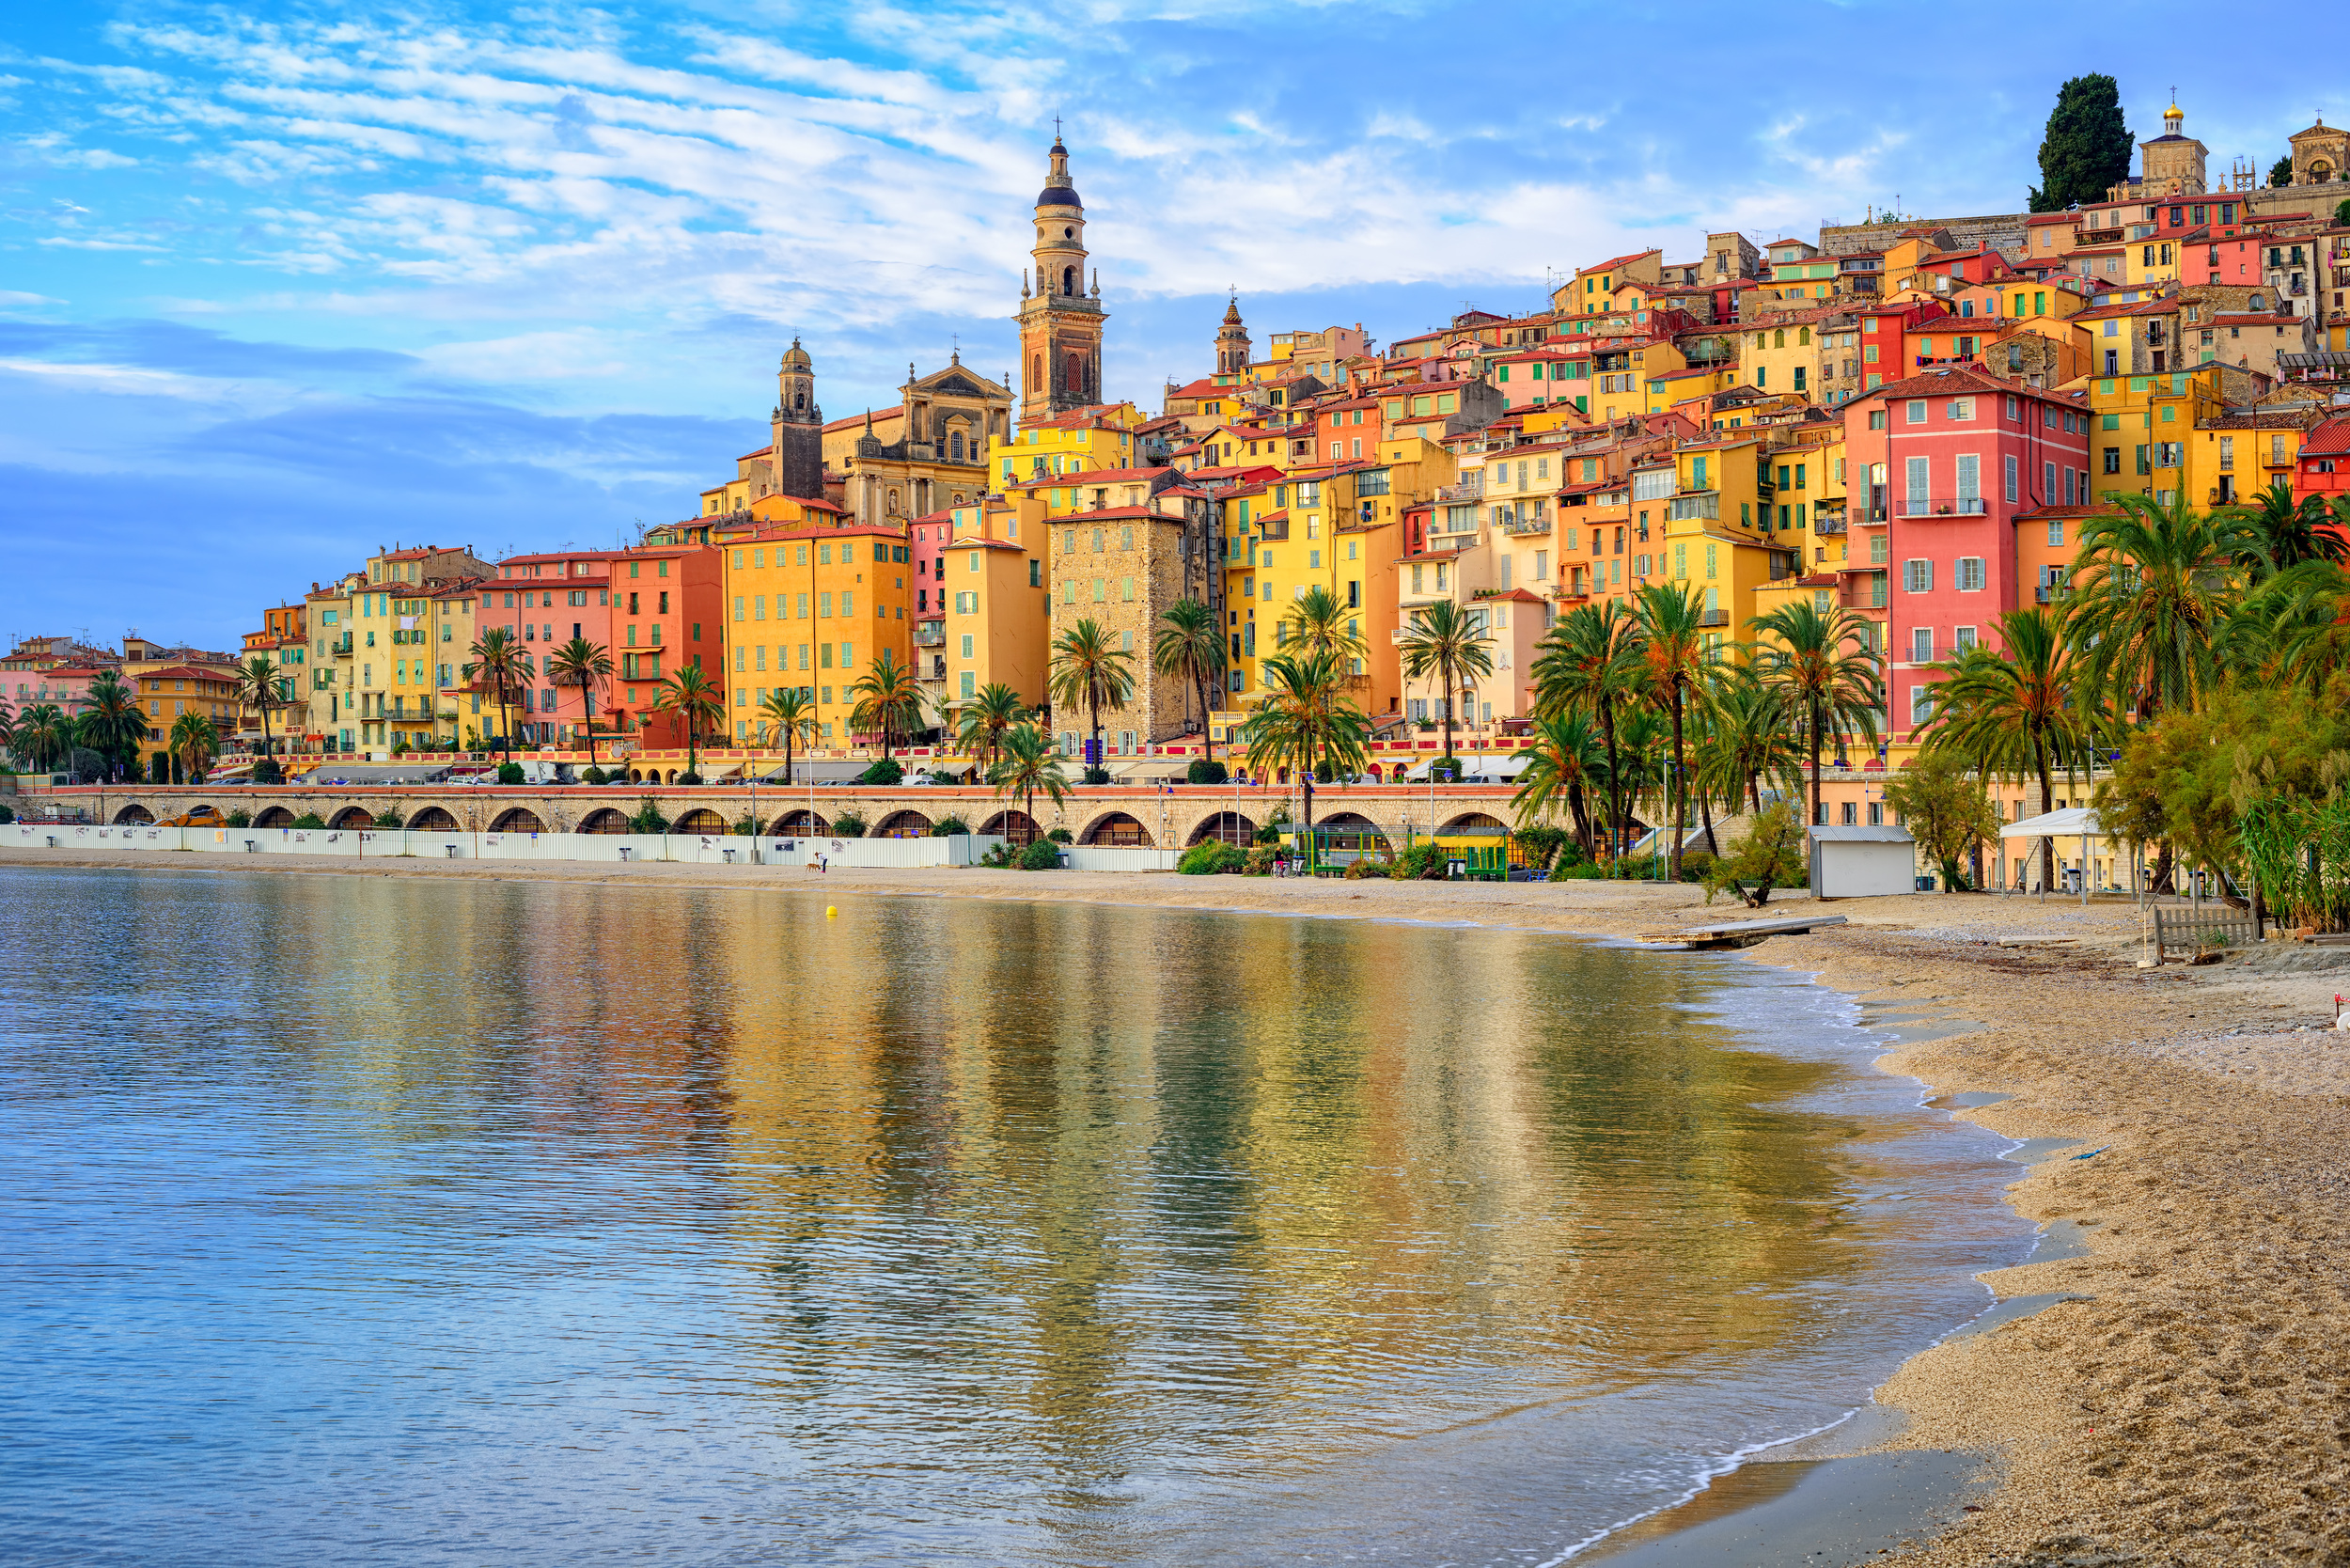 <p>The French Riviera is synonymous with vacations by the sea. And Nice, one of the area’s largest cities, is a great place to enjoy some sun. Take in the Mediterranean against a backdrop of candy-colored buildings in Art Deco and Baroque style.</p><p>You may also like: <a href='https://www.yardbarker.com/lifestyle/articles/13_foods_drinks_that_cause_bad_breath_and_13_that_combat_it_021324/s1__36110171'>13 foods & drinks that cause bad breath and 13 that combat it</a></p>